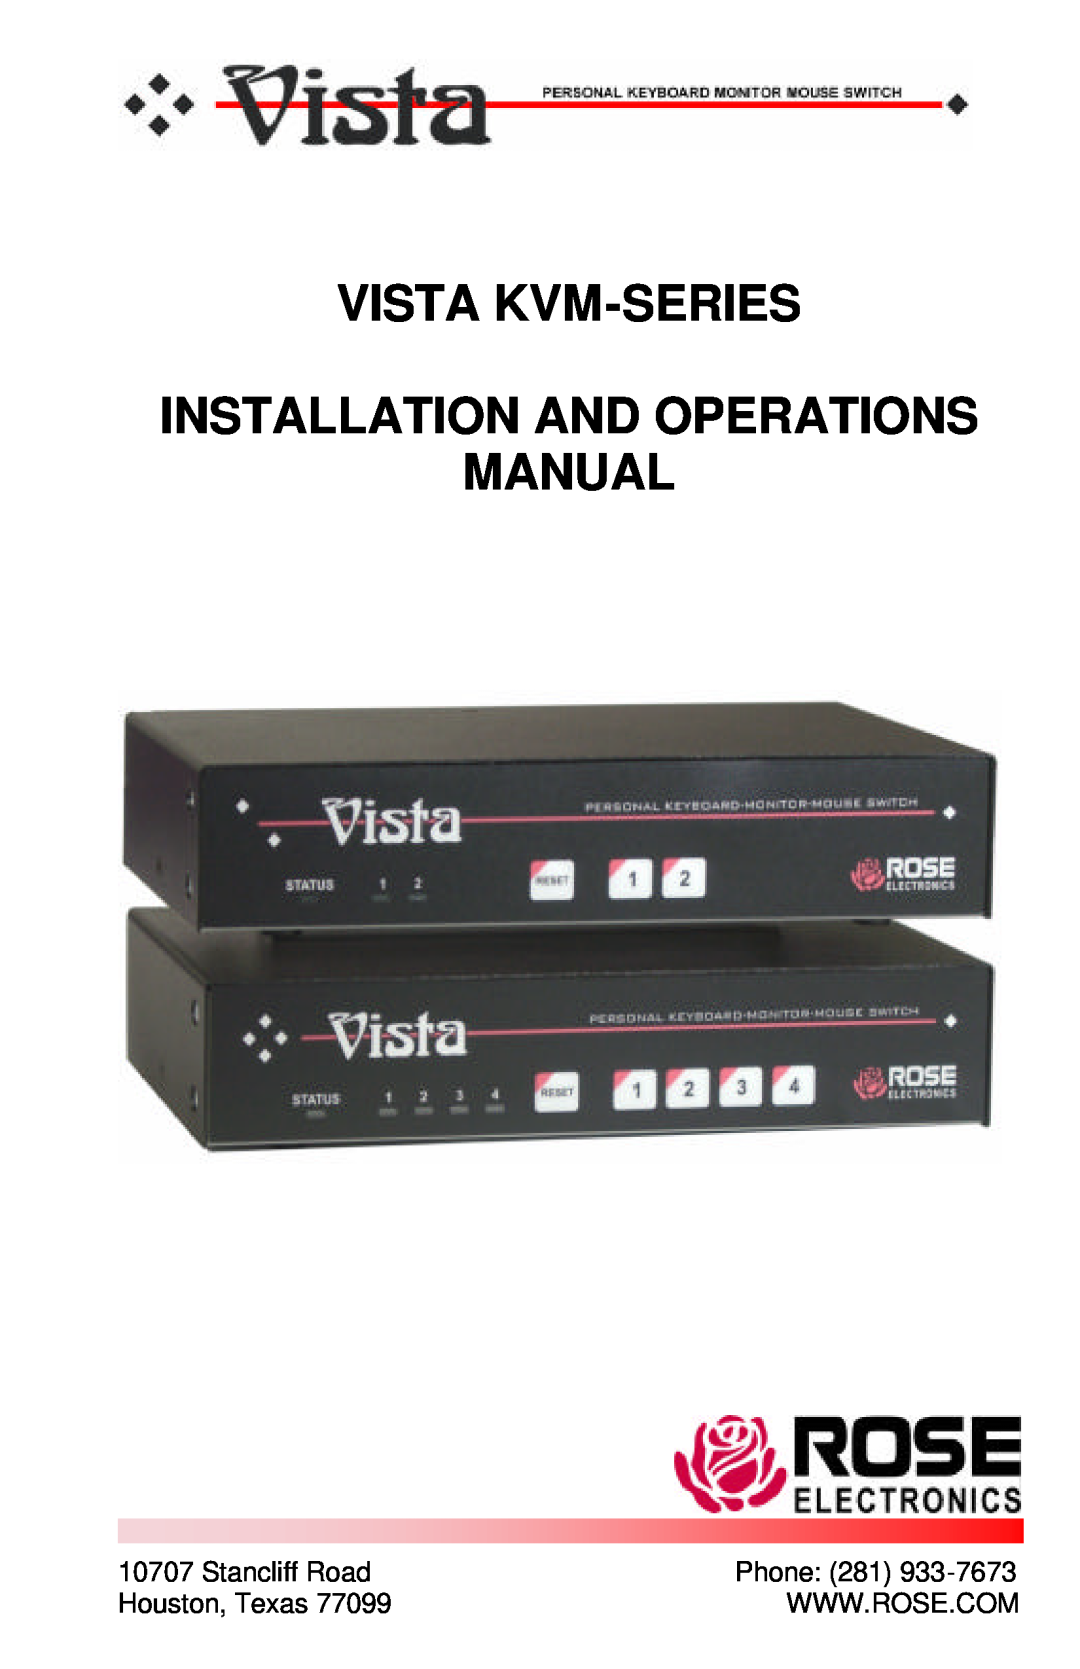 Rose electronic MAN-V8 manual Vista Kvm-Series Installation And Operations Manual, Stancliff Road, Phone 281 